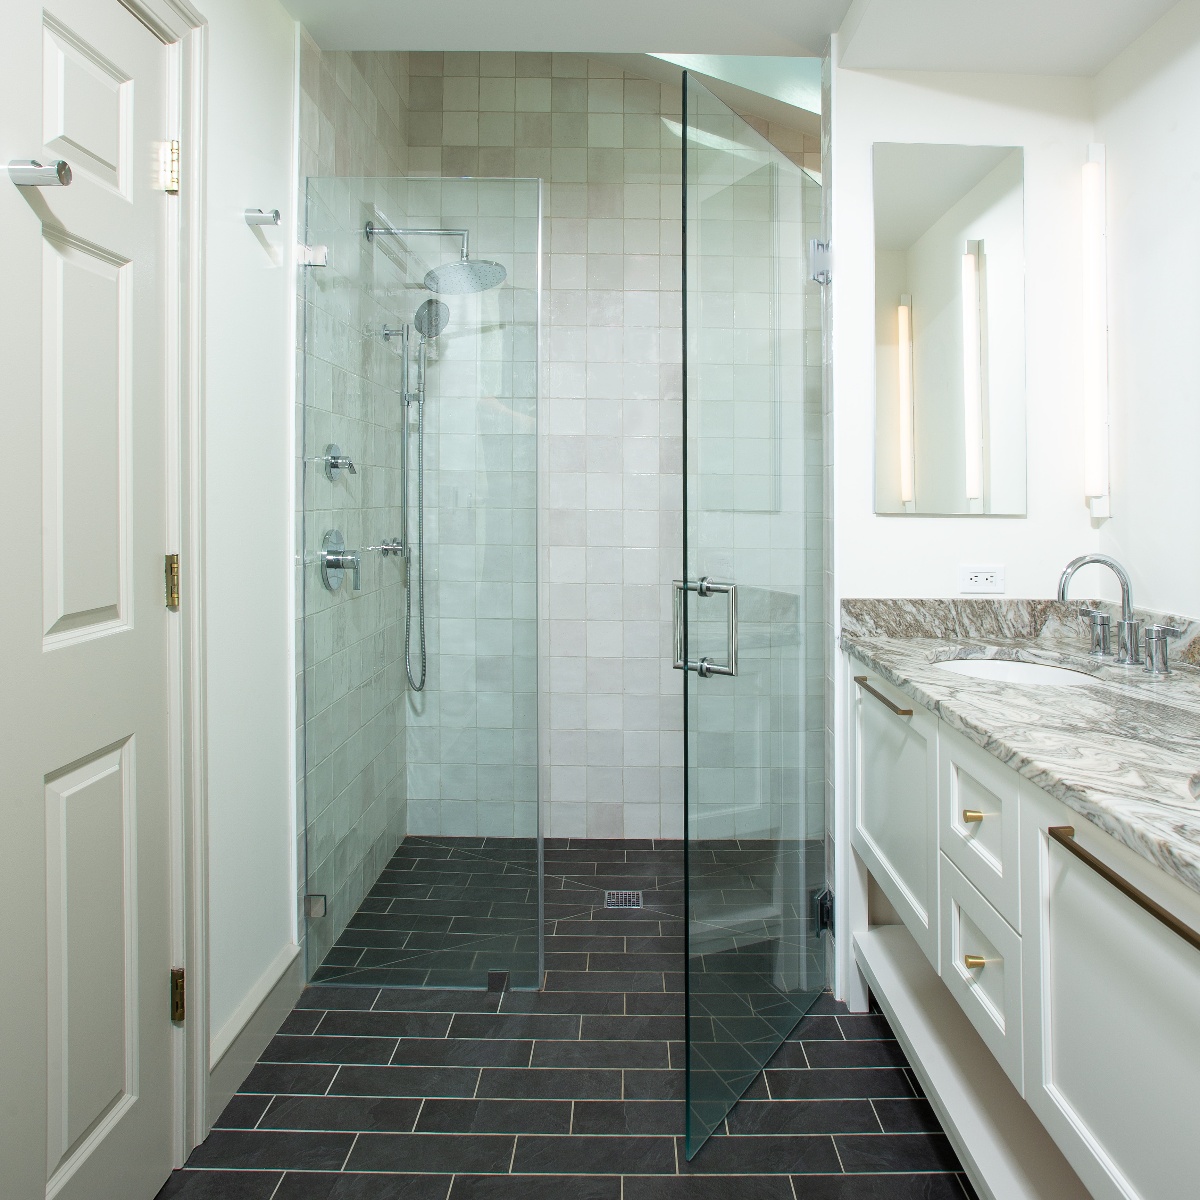 Bathroom with glass walk-in shower, and white wood cabinets and doors, and black tile flooring